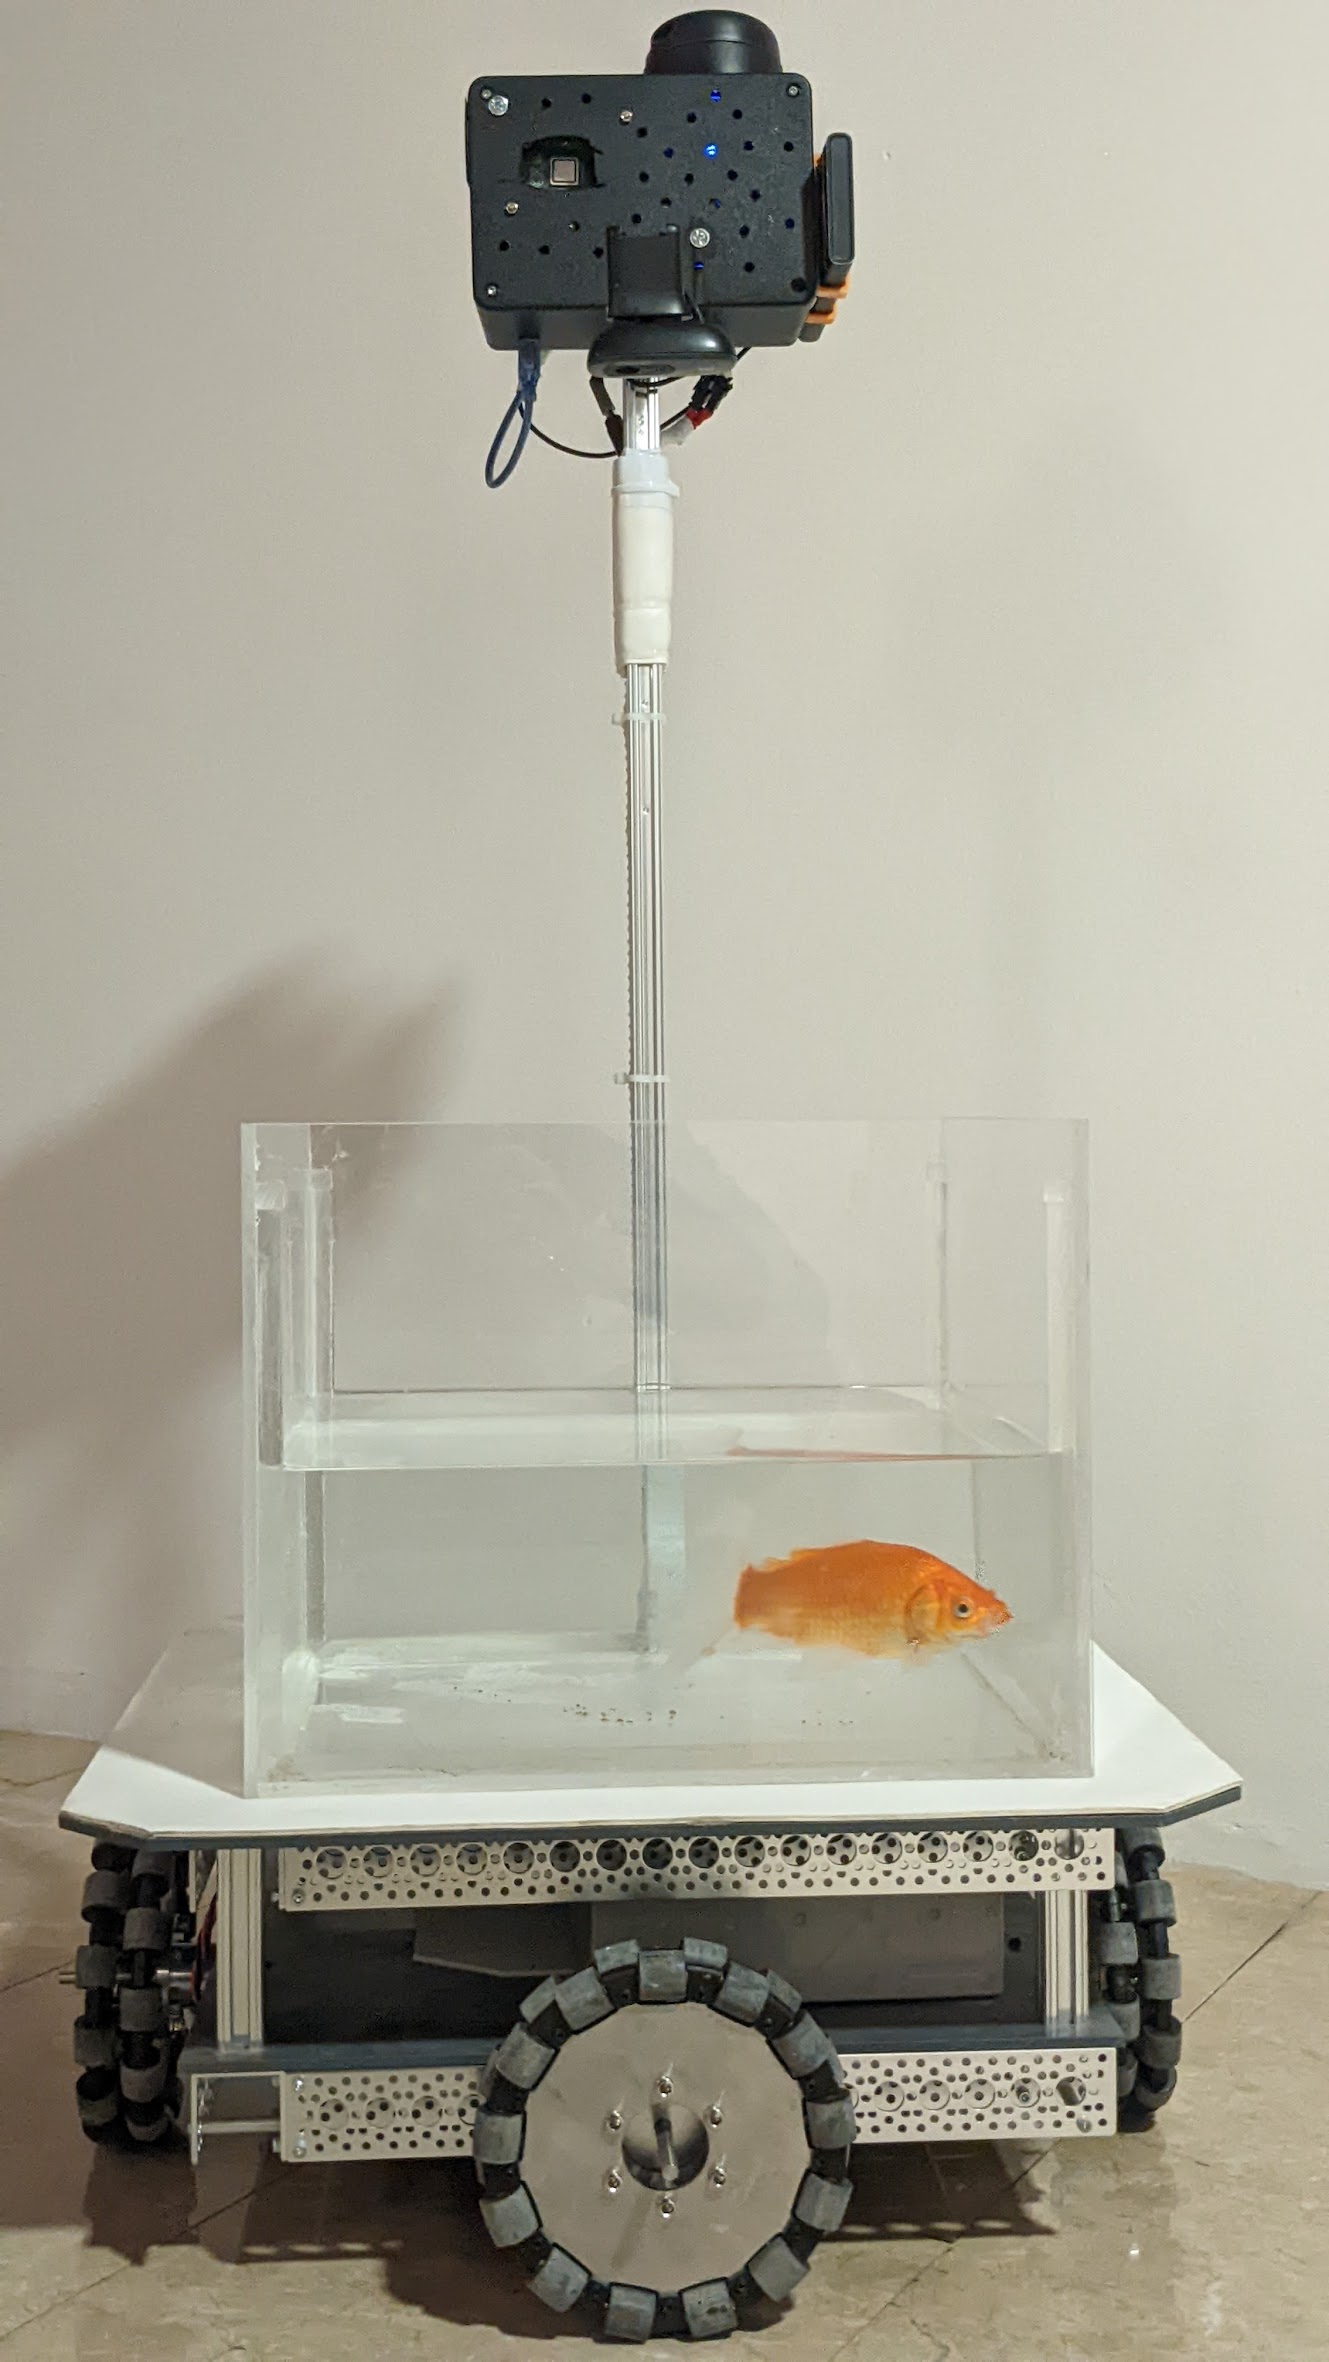 Fish in a tank on wheels